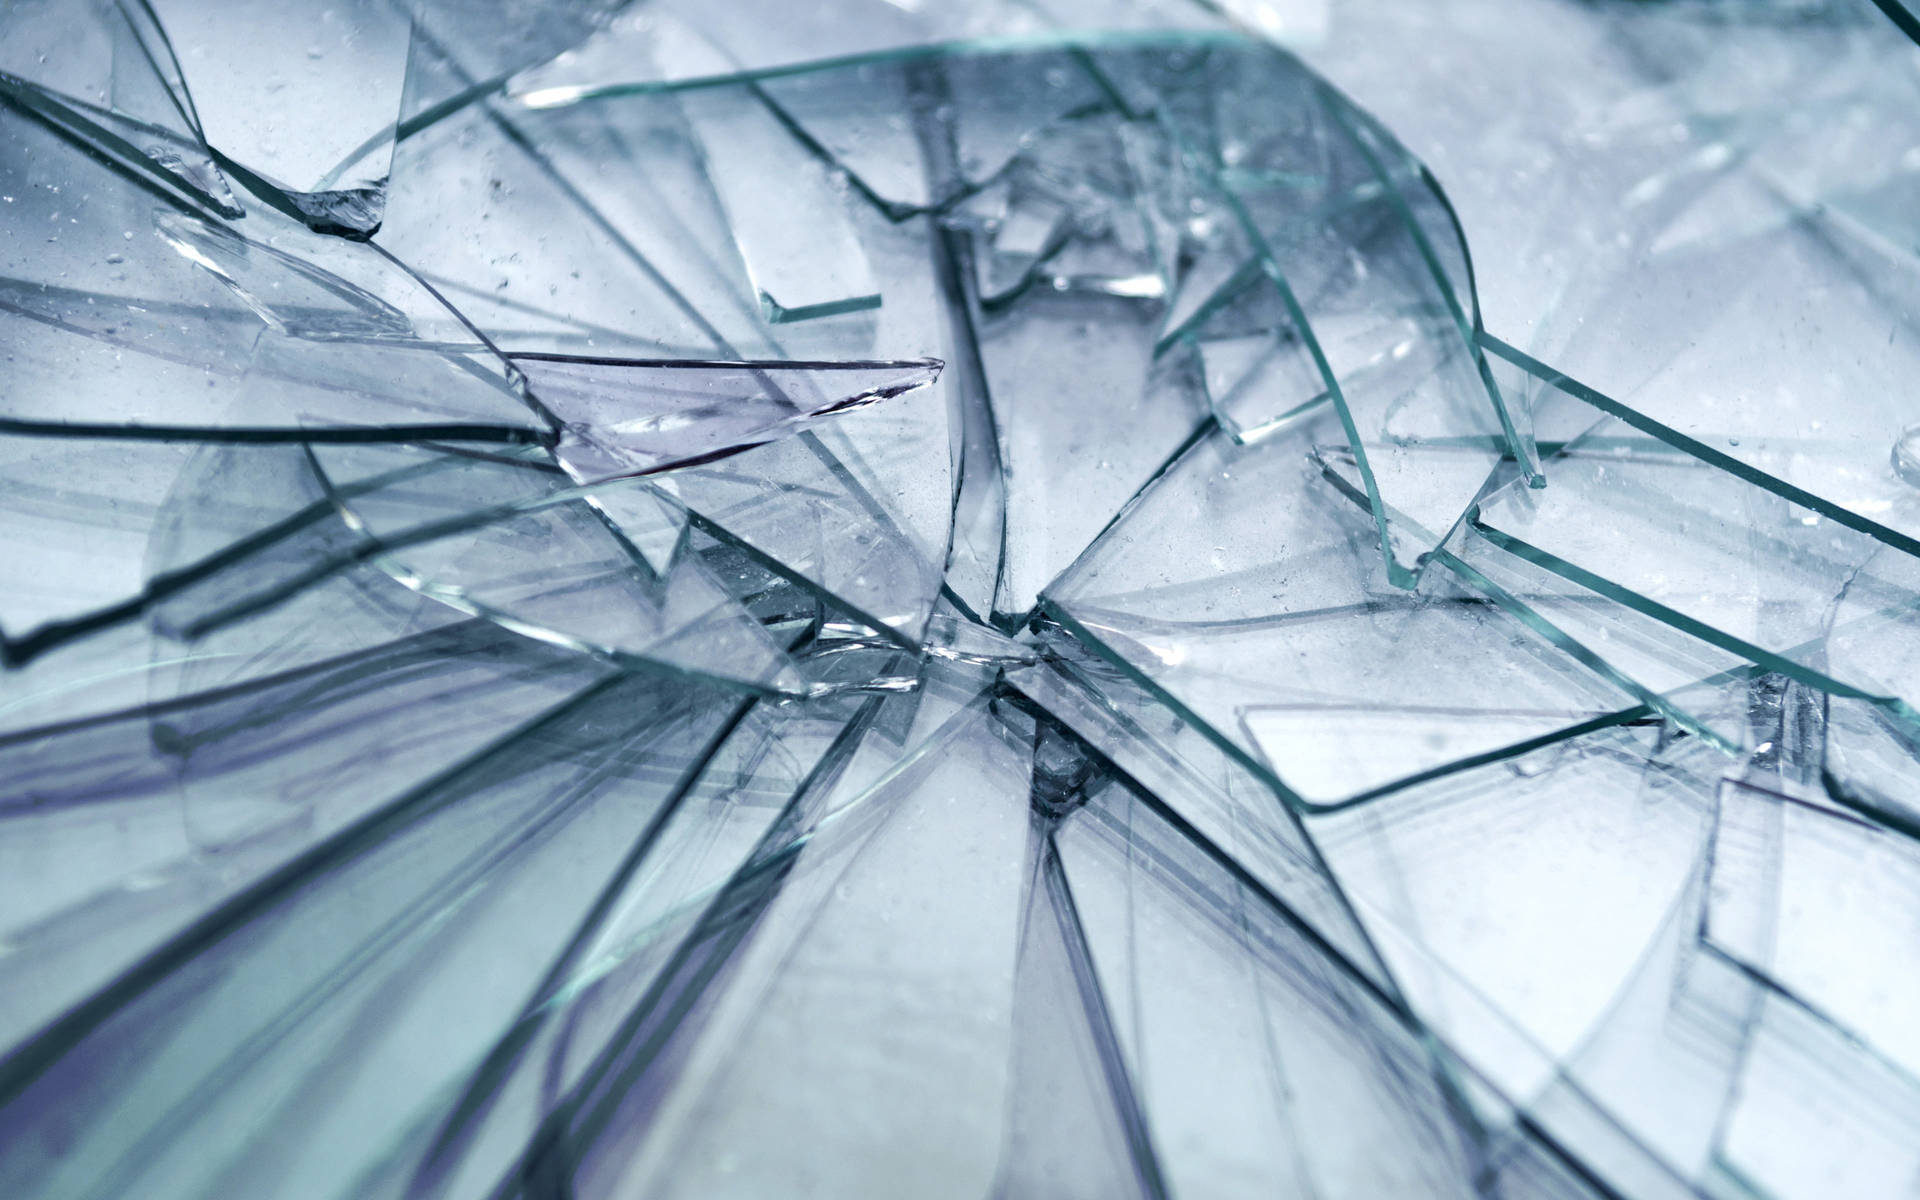 A Fascinating Depiction Of Broken Glass